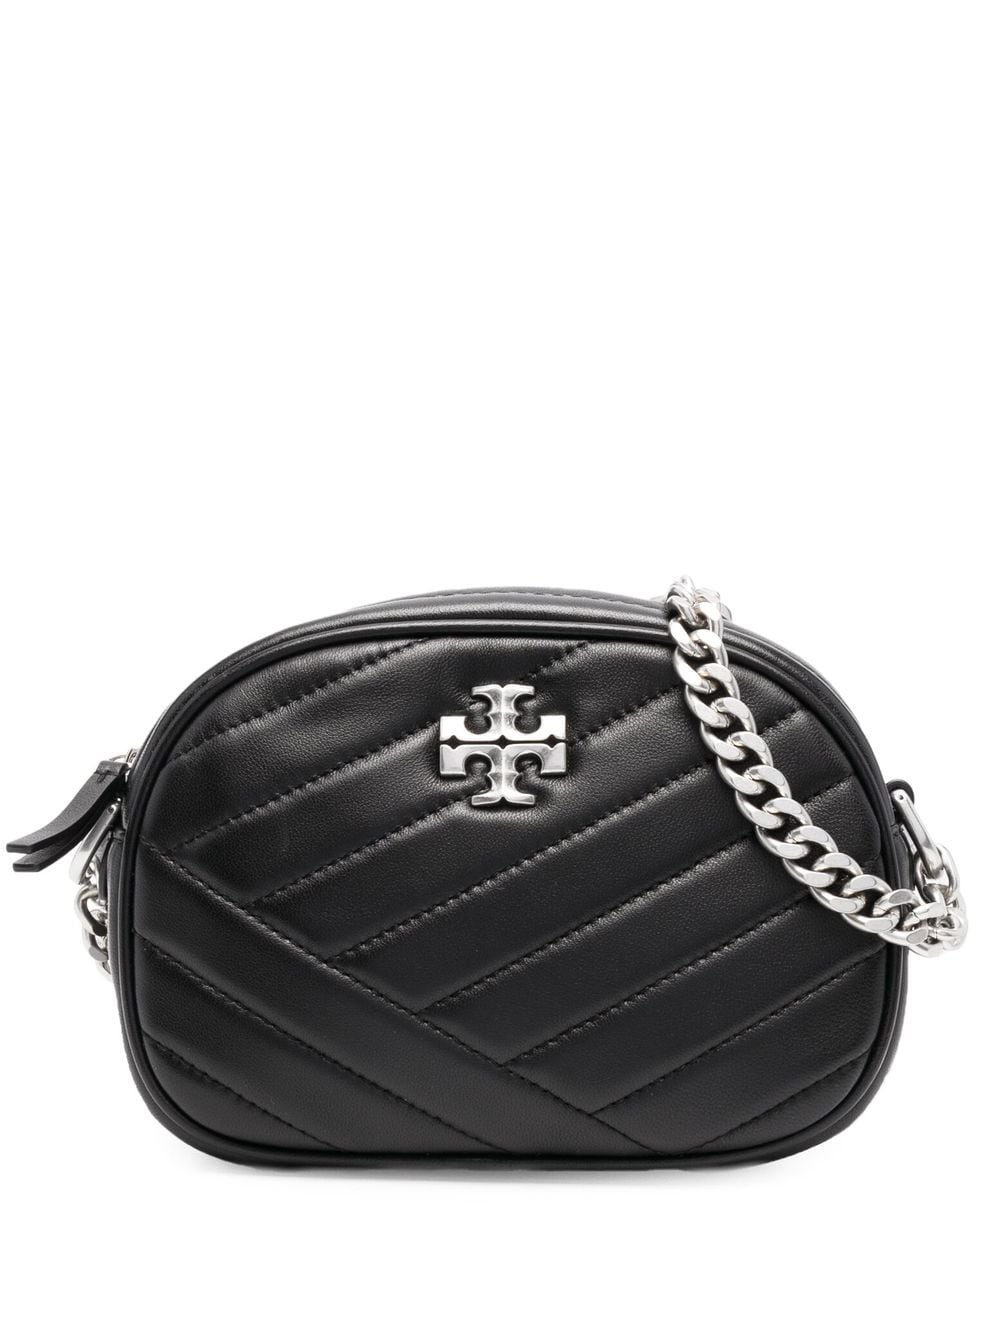 Image 1 of Tory Burch Kira chevron-quilted camera bag